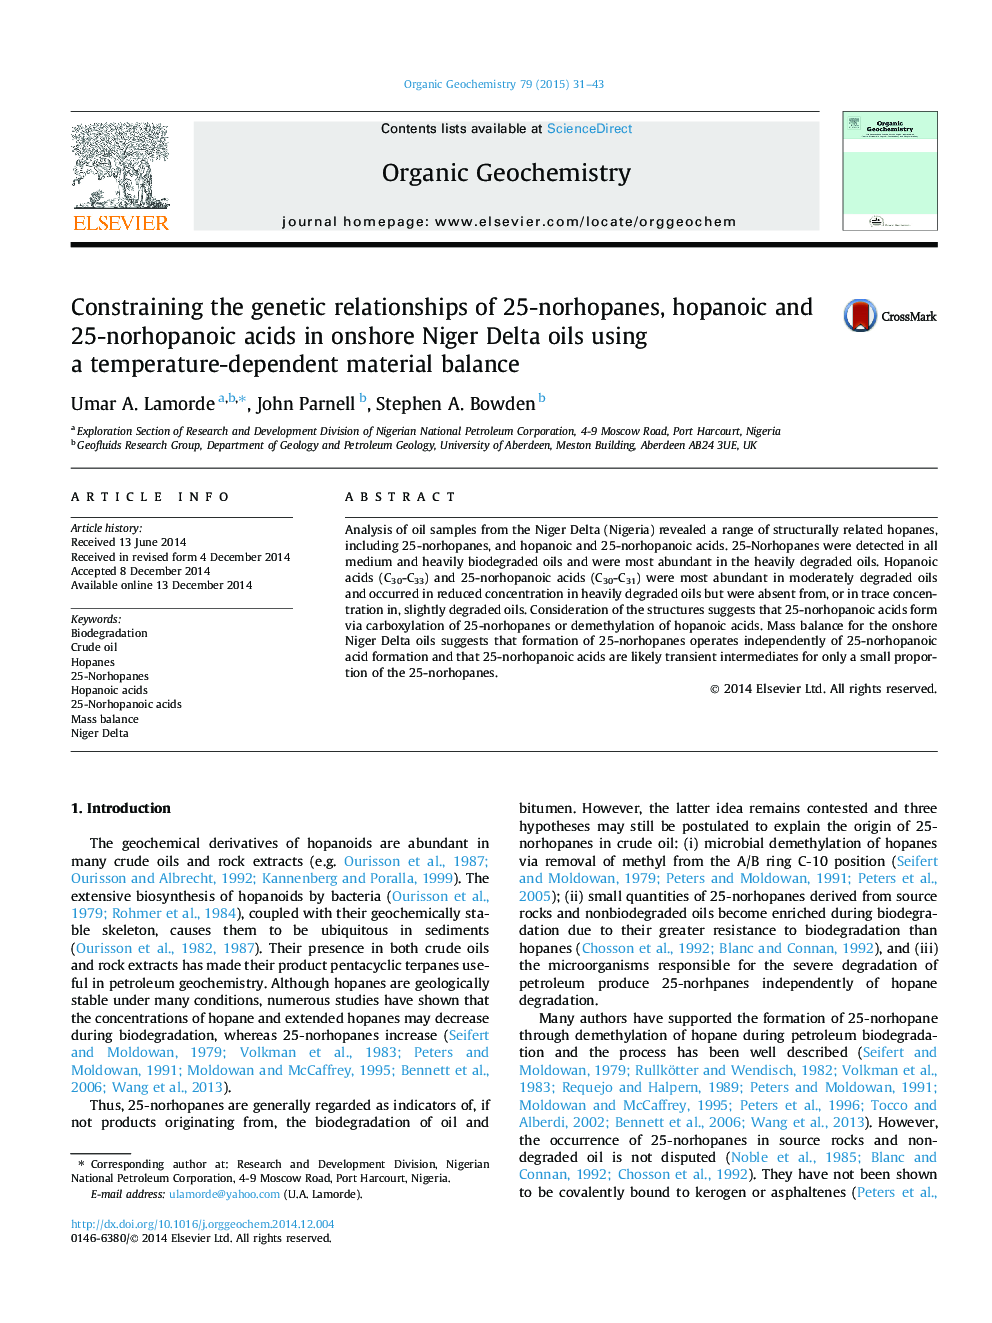 Constraining the genetic relationships of 25-norhopanes, hopanoic and 25-norhopanoic acids in onshore Niger Delta oils using a temperature-dependent material balance